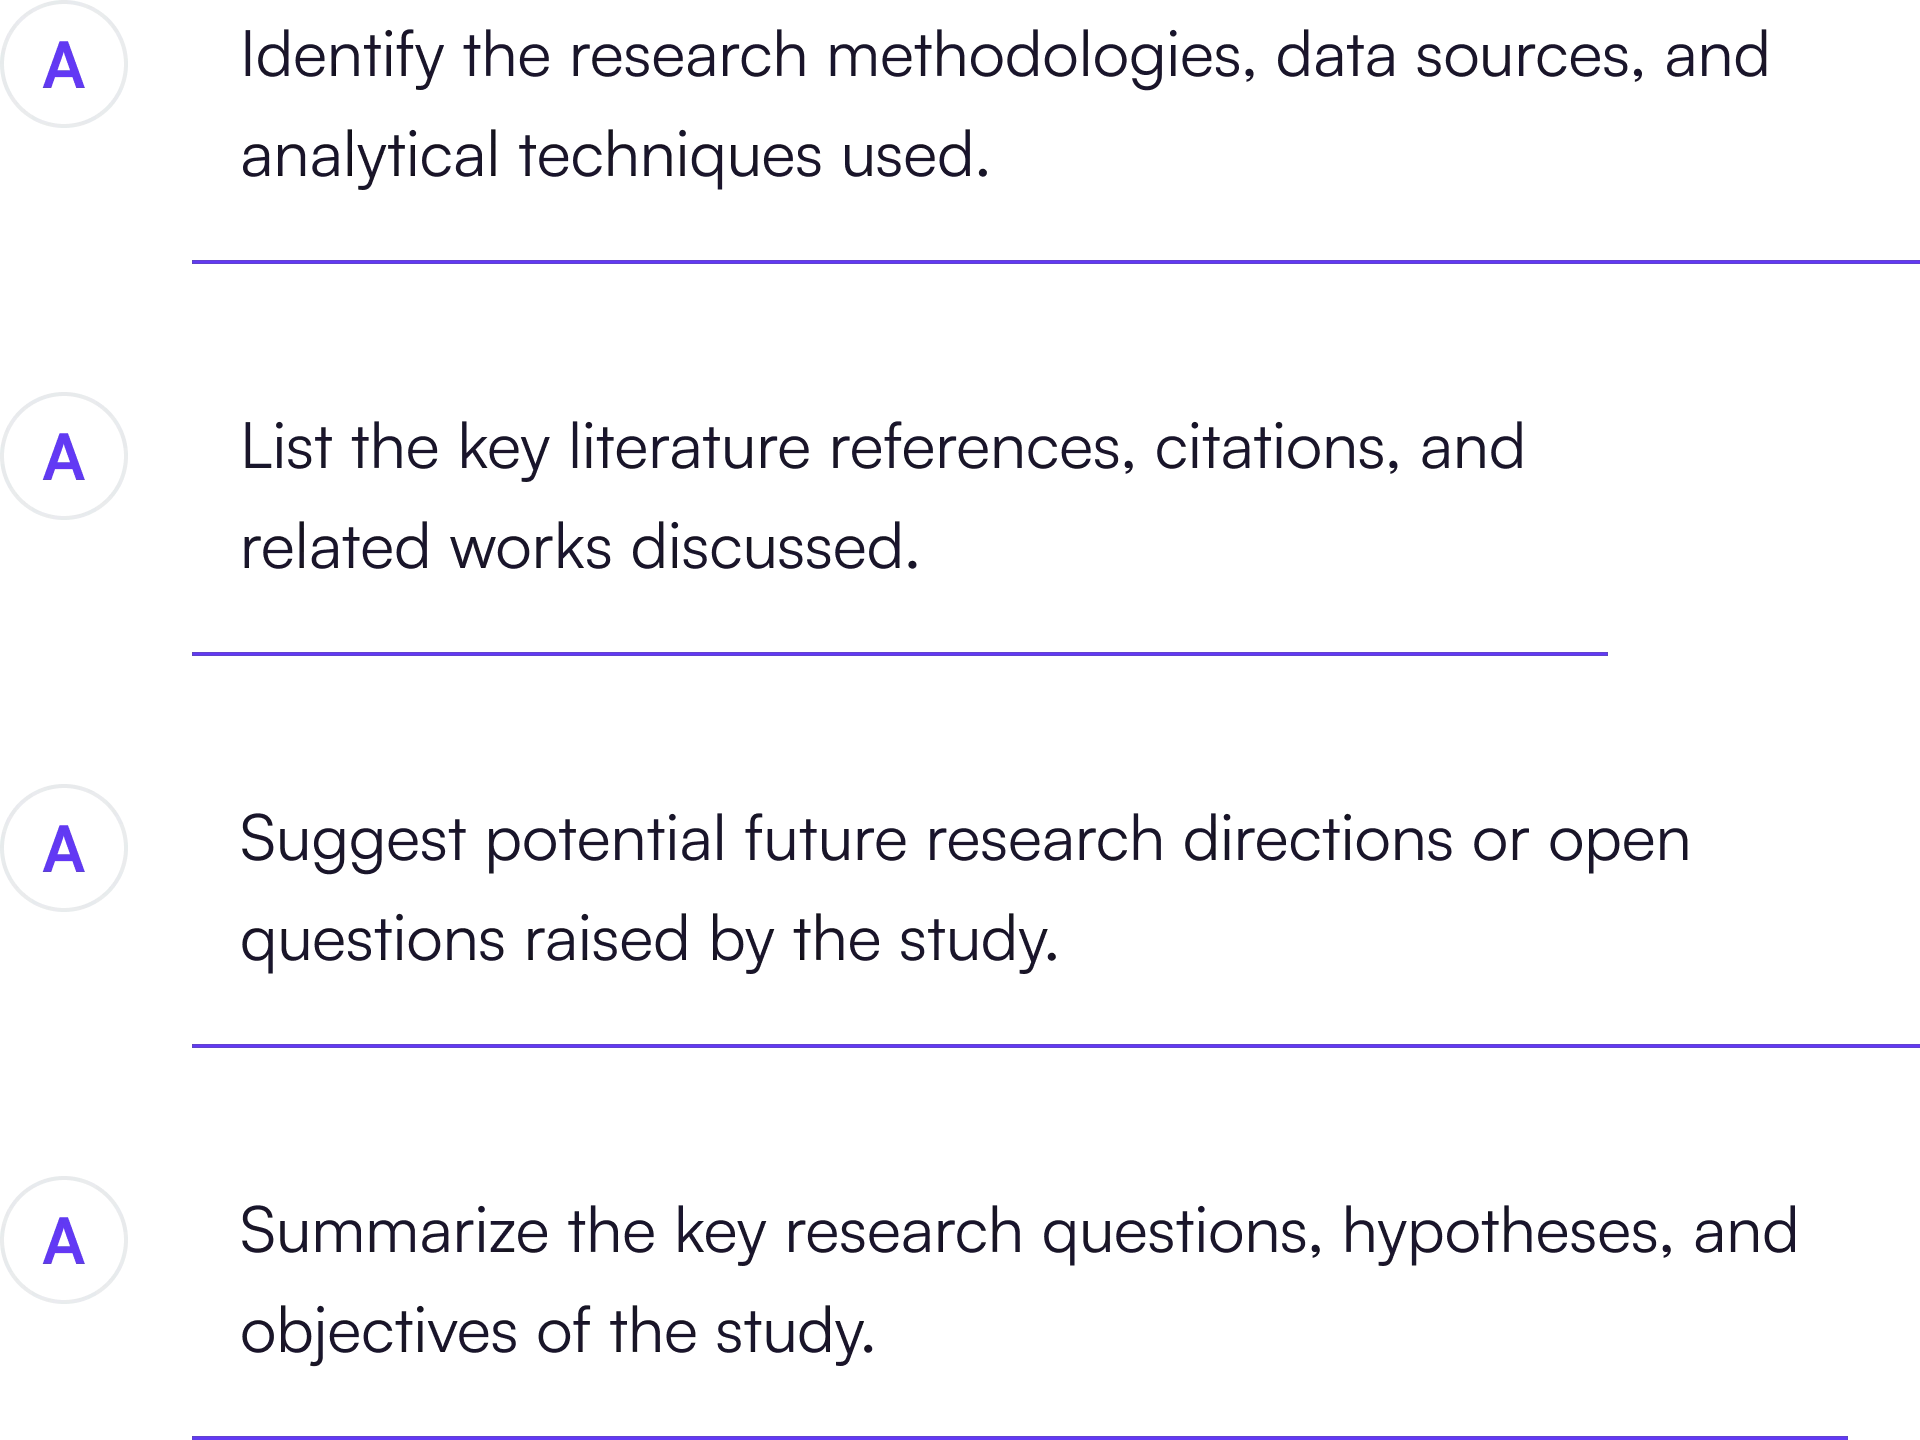 Additional questions for the use case - Academic Research